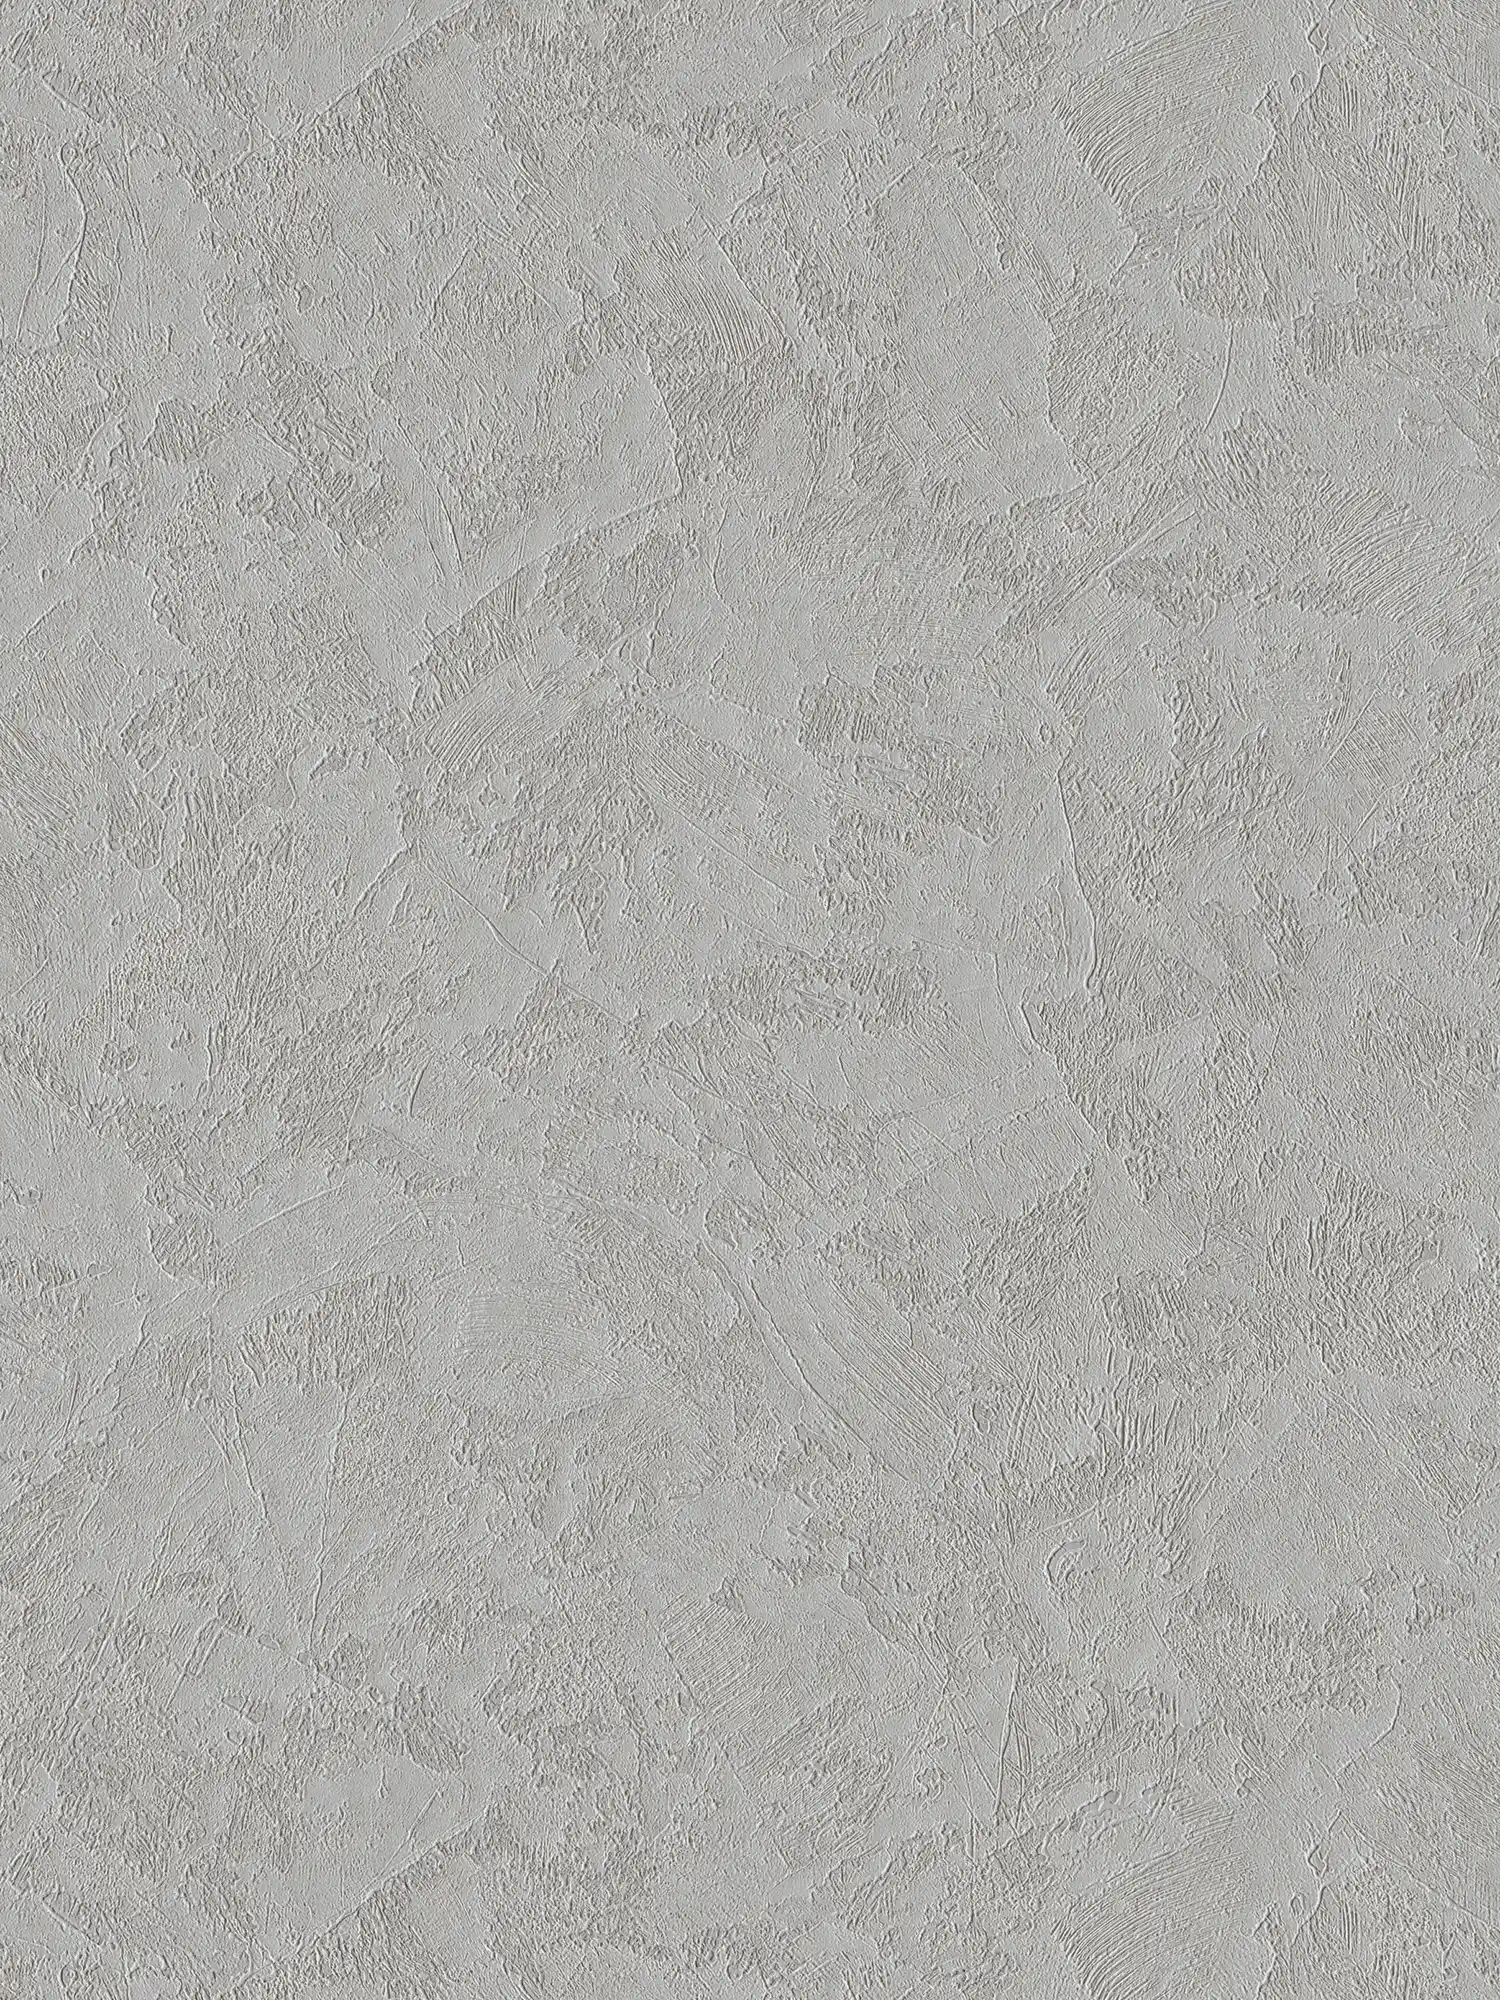 Plain textured wallpaper in plaster look with glitter effect - grey, silver
